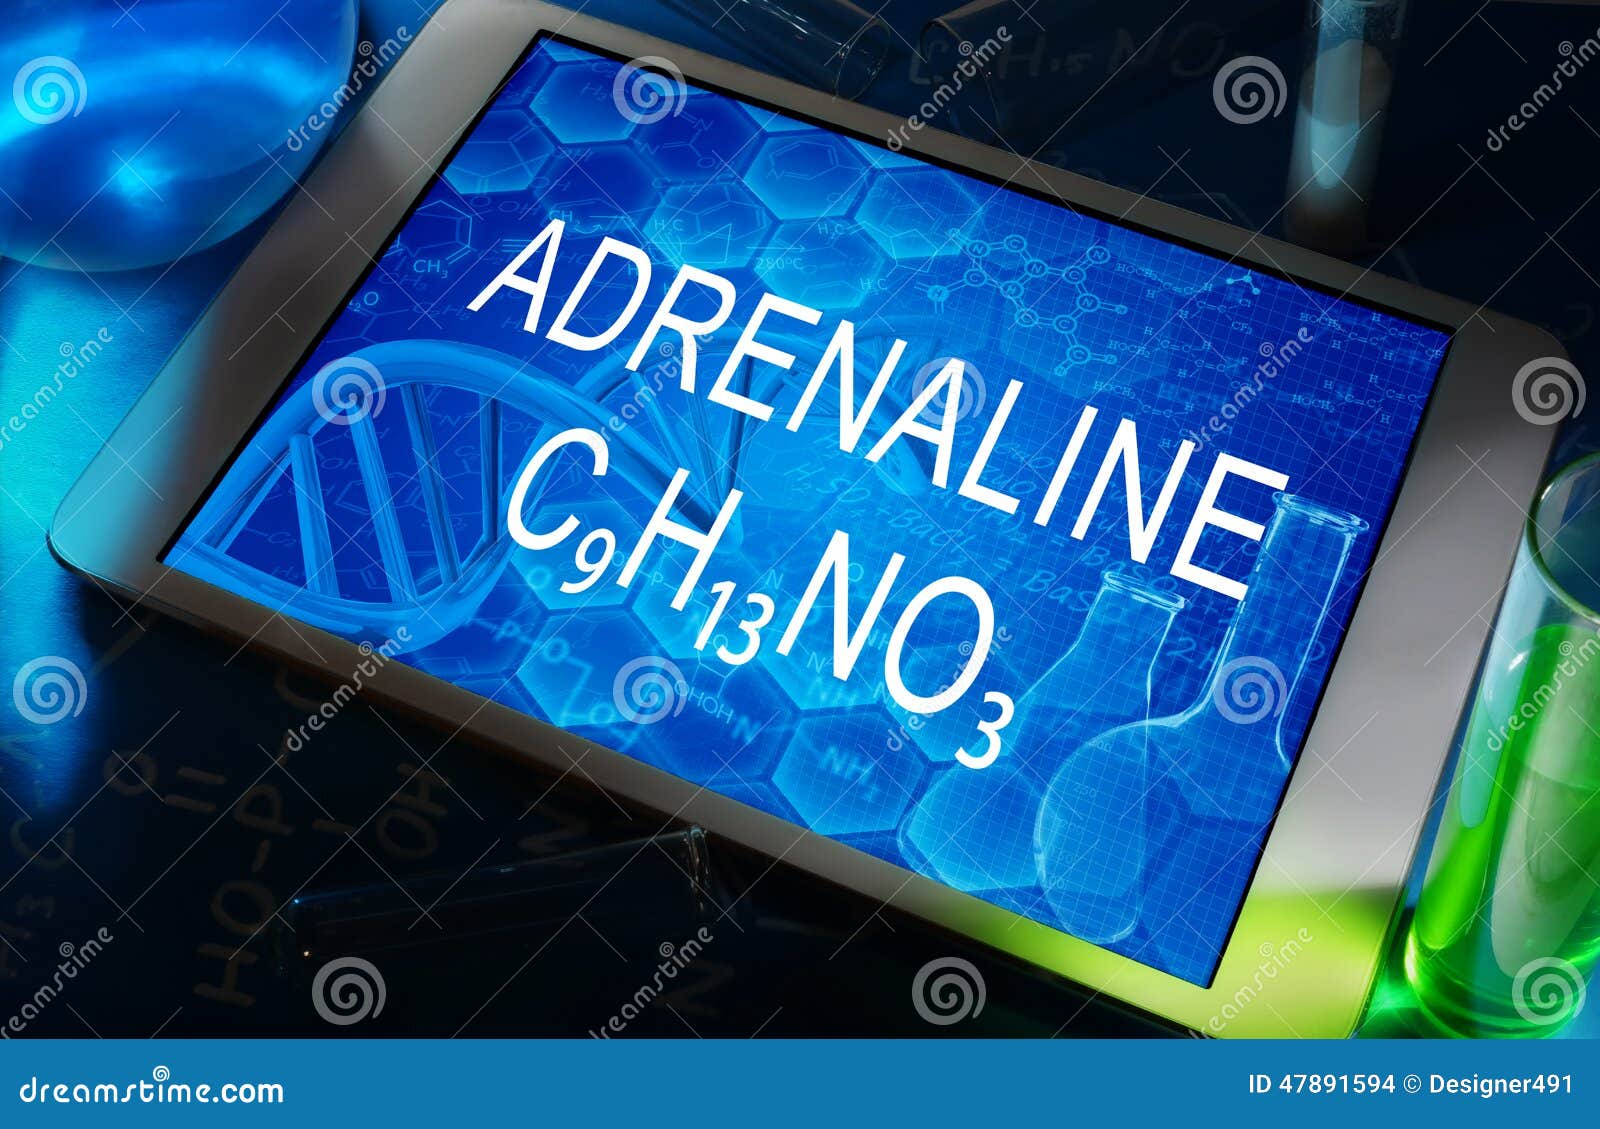 the chemical formula of adrenaline